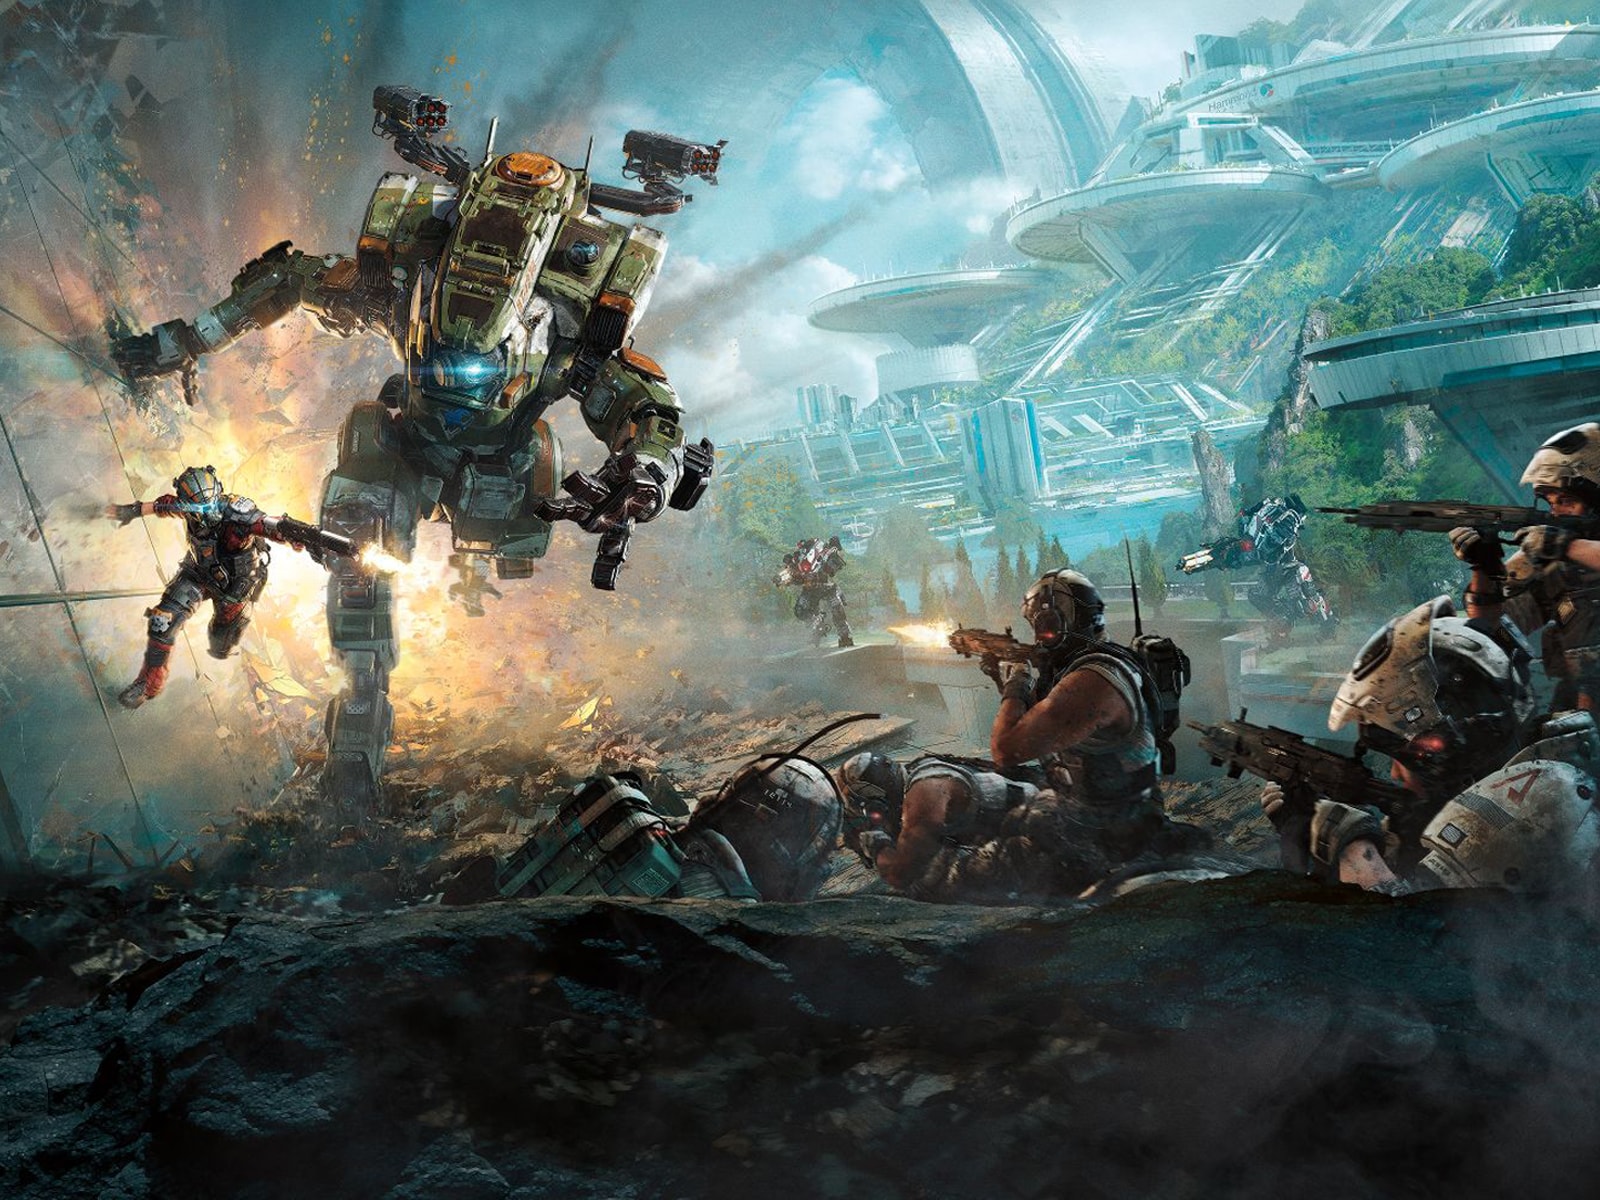 Screenshot from Titanfall 2 of a Titan, a huge robot-like exoskeleton containing a pilot, chasing a man in a futuristic city